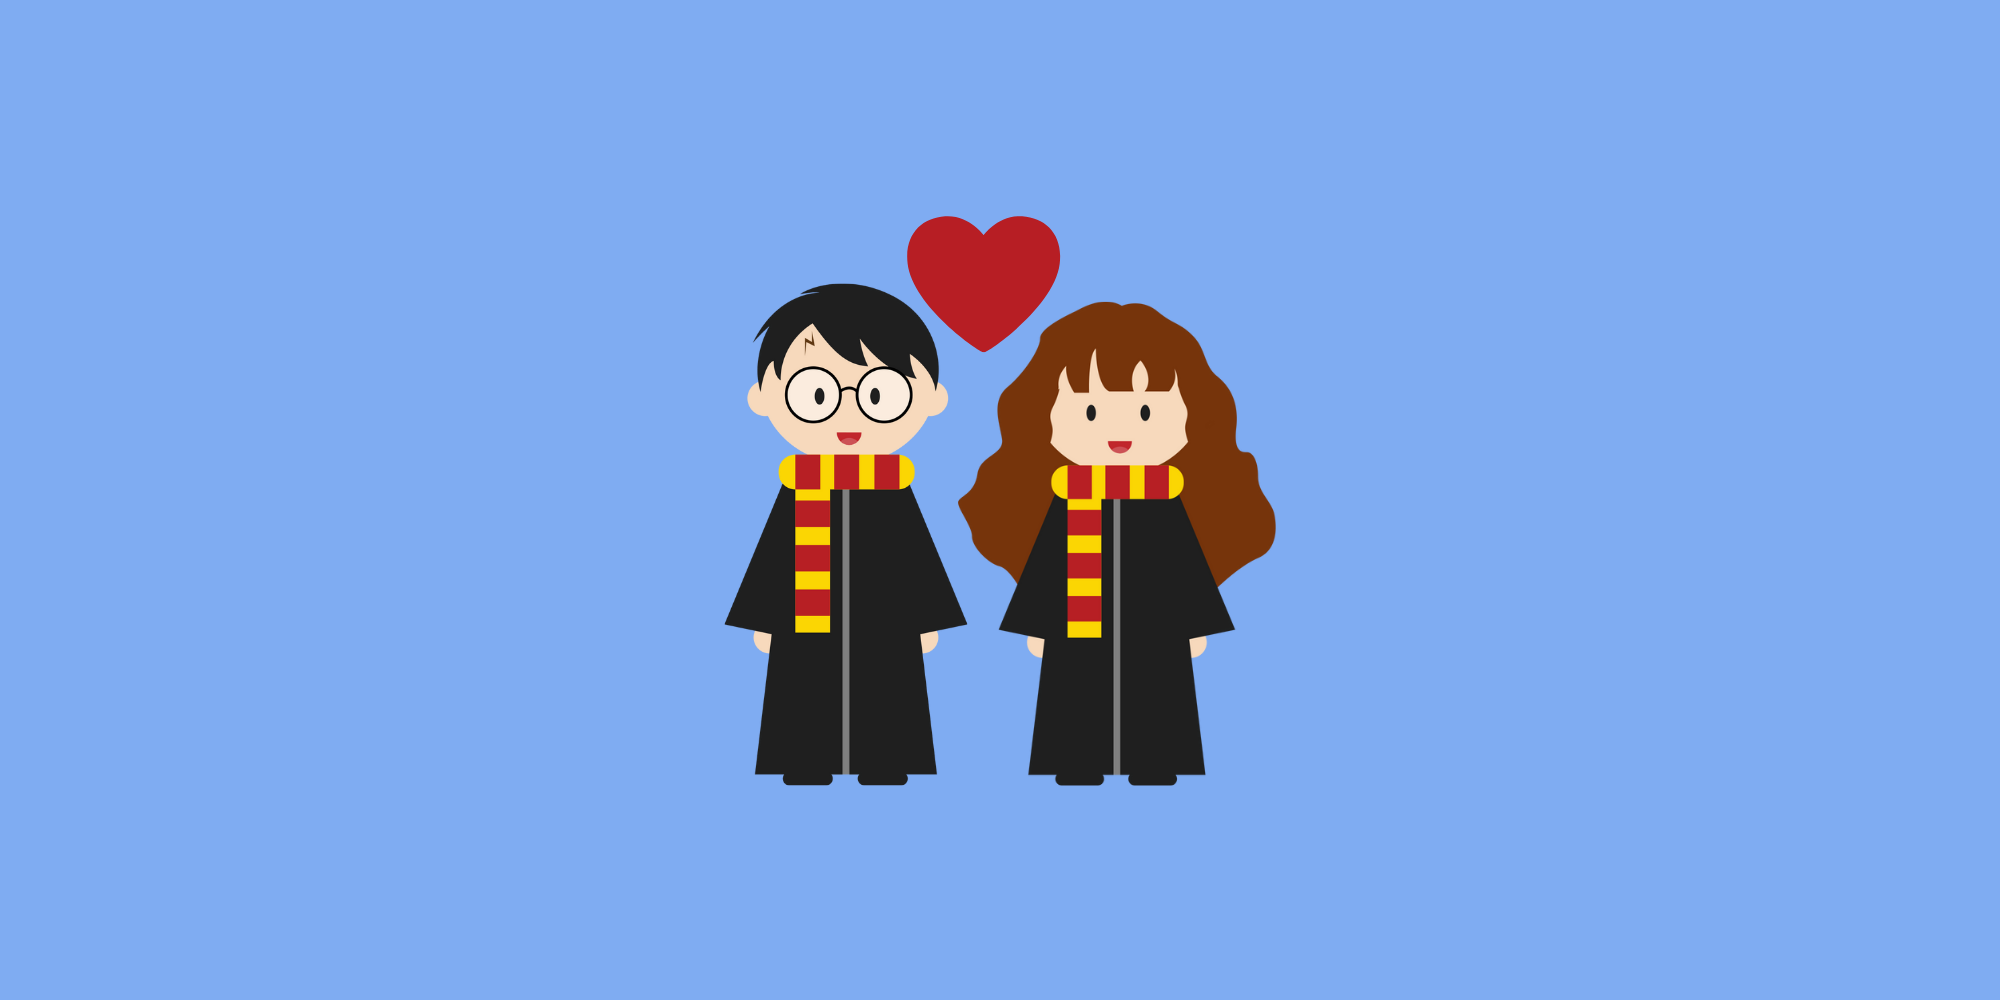 Harry-Potter-wedding-gifts